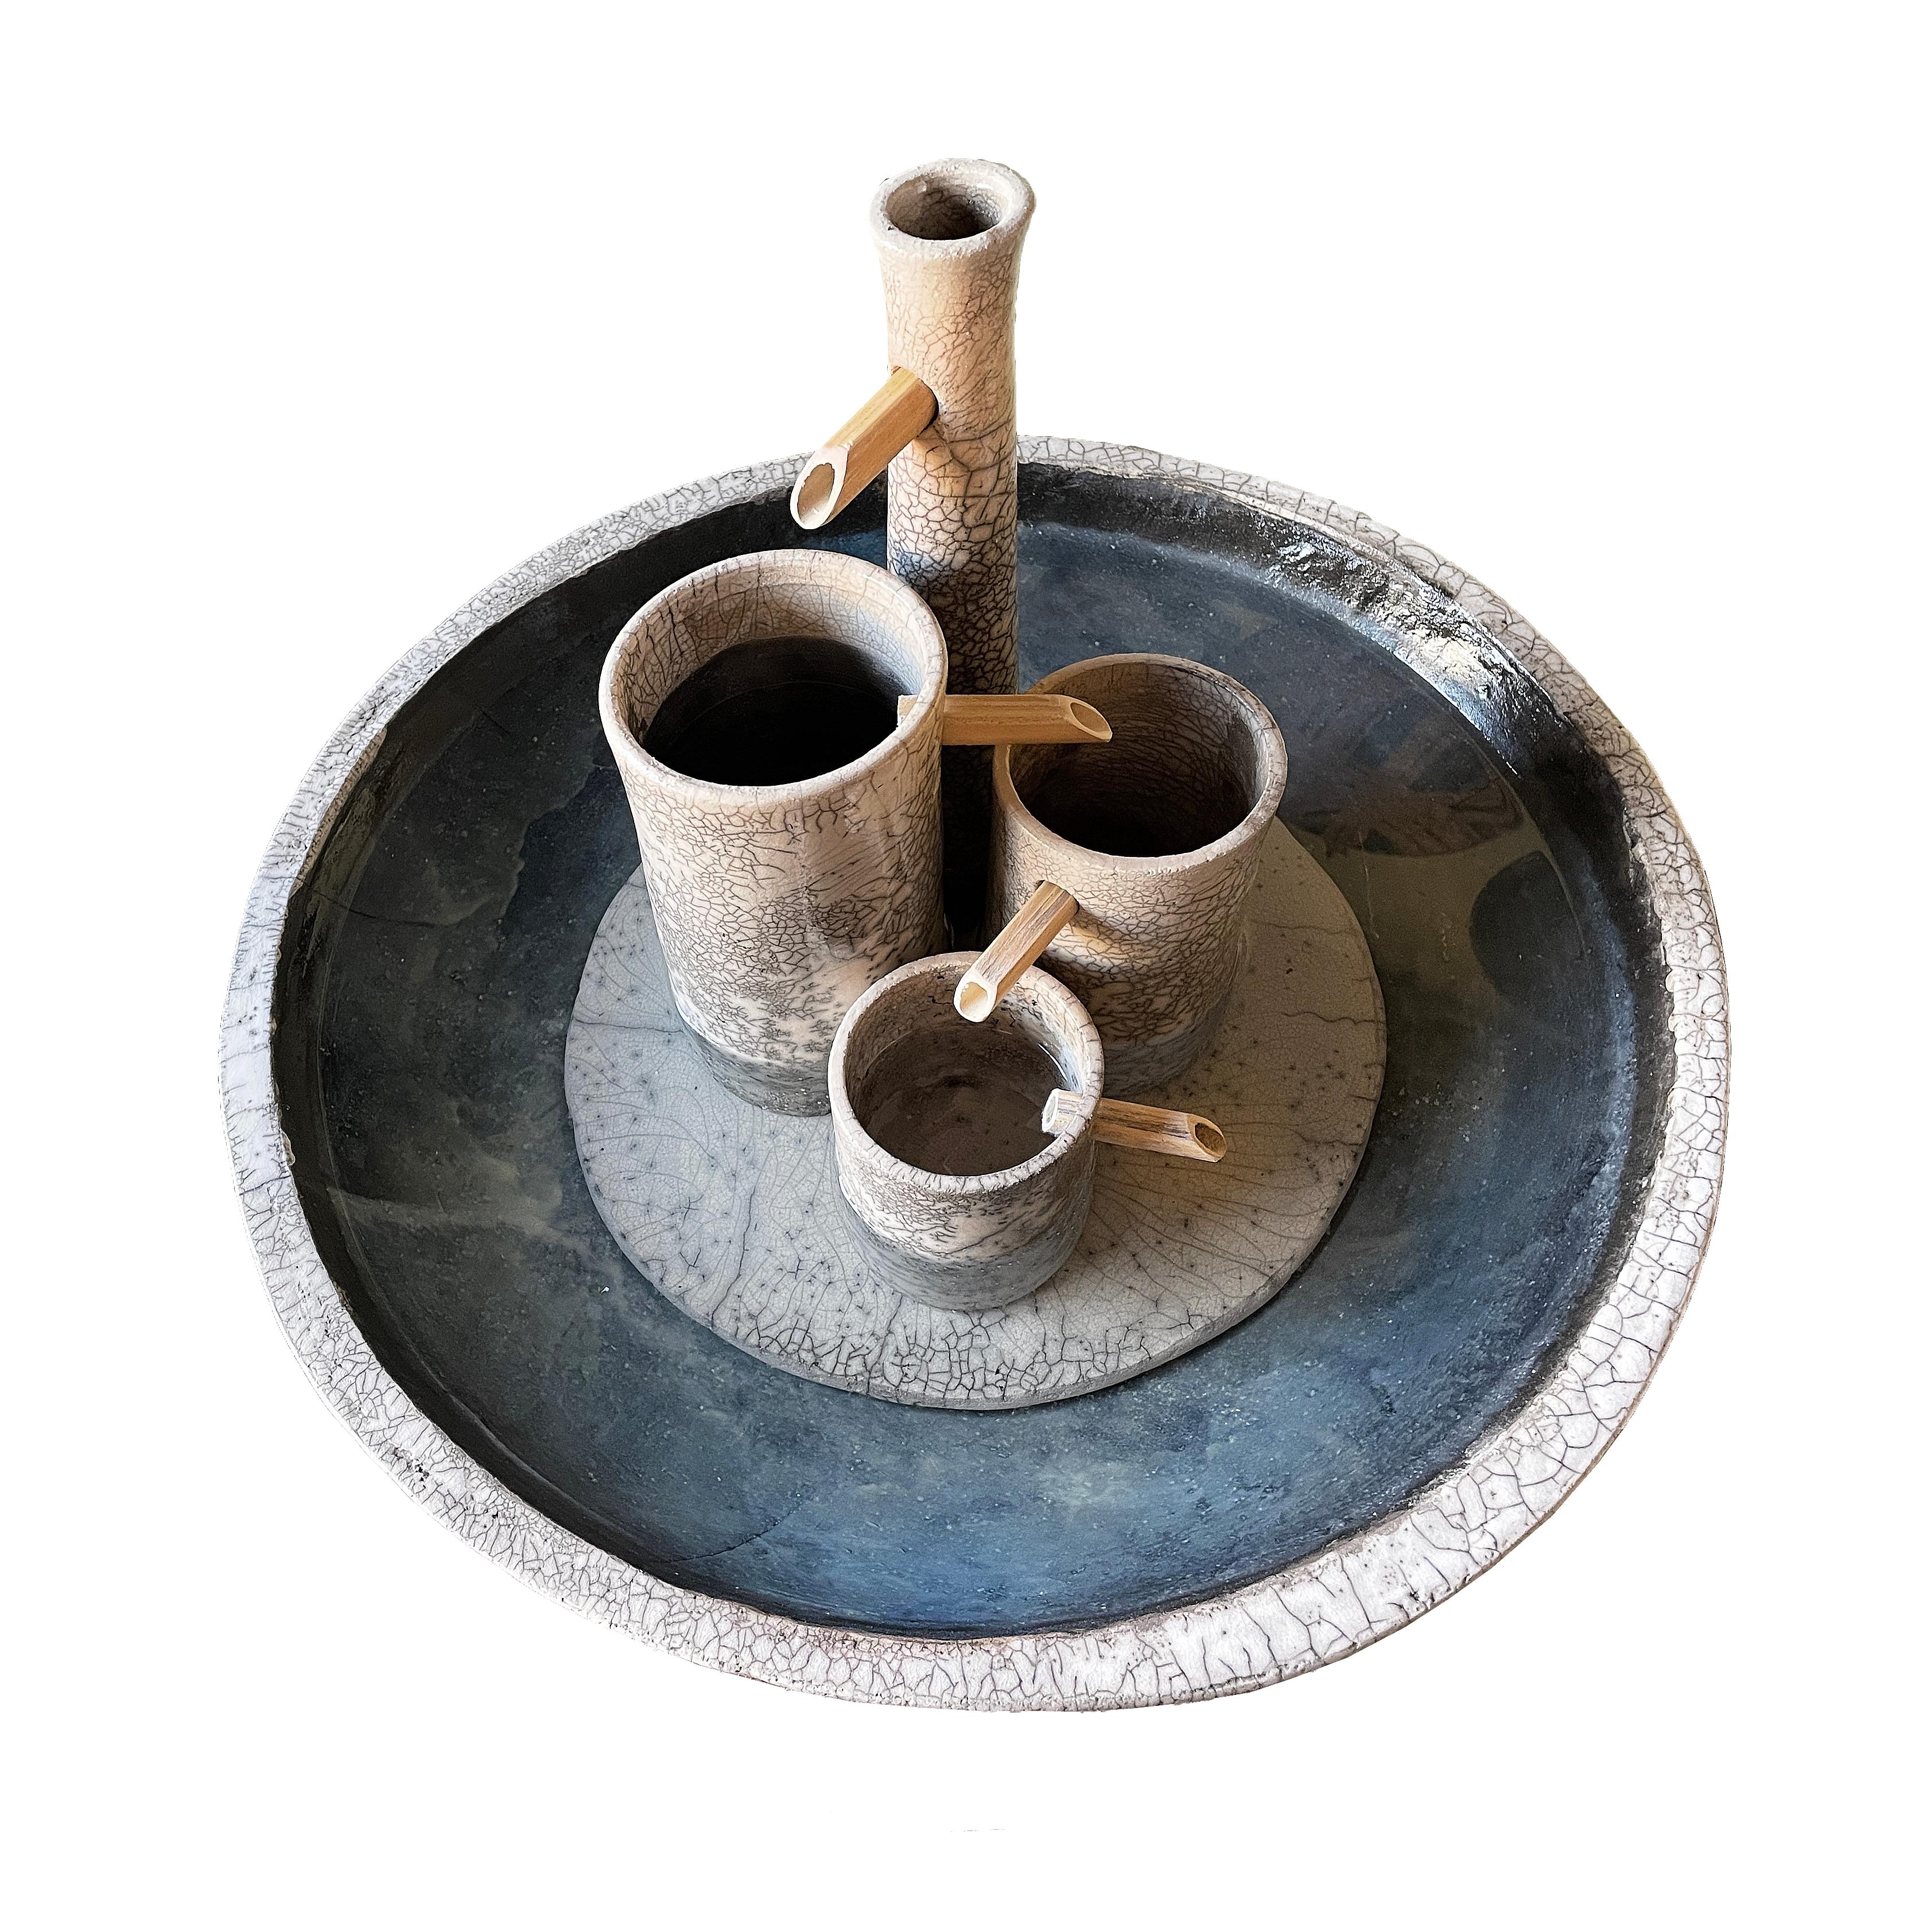 The most elegant of the Genesi fountains, it's a pleasure to the eyes and to the ears. The Raku elements let the water flow perpetually from the tallest to the smallest recipient and finally into the large vessel creating a soothing sound while the